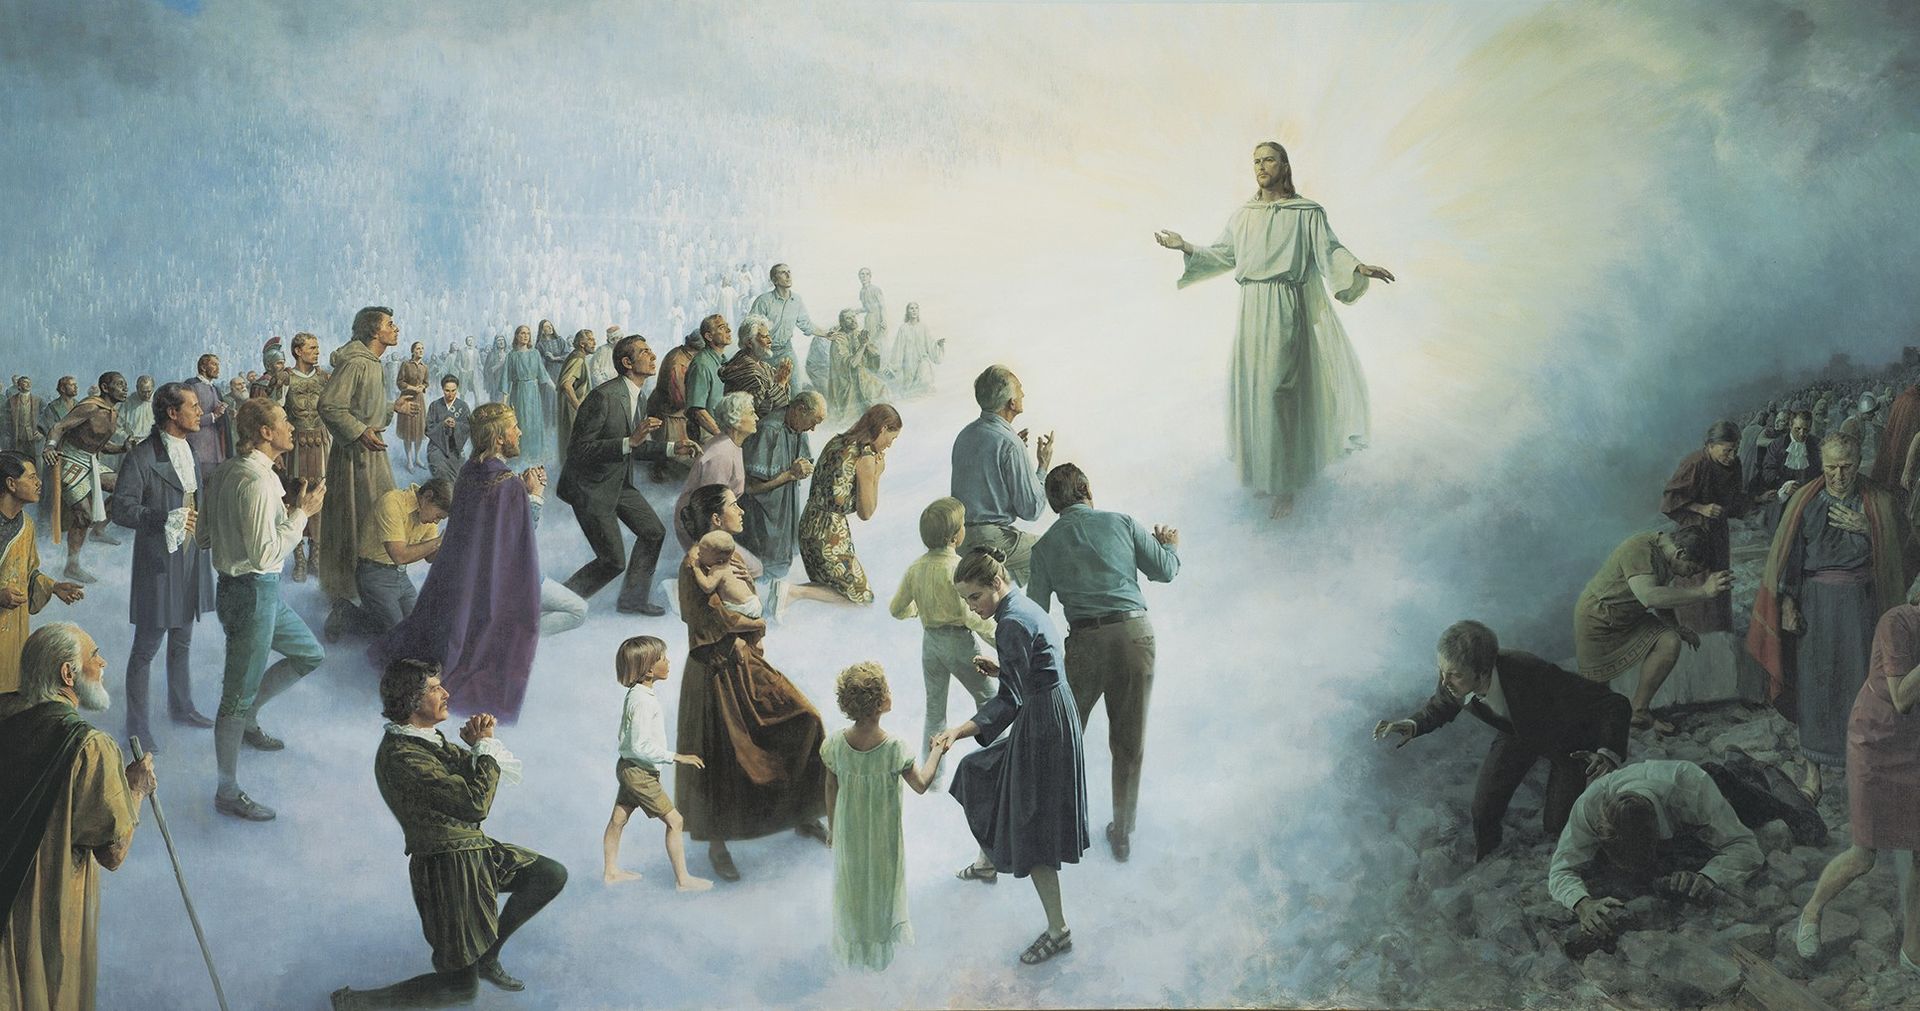 Resurrected Christ with arms outstretched stands above a throng of people of all races and times, some prone, some standing. The people on the right side of Christ are in the attitude of worship. The people on the left side of Christ are in anguish. Scenes of ruin are in the foreground and background. The Washington D.C. temple is pictured in the upper left corner.